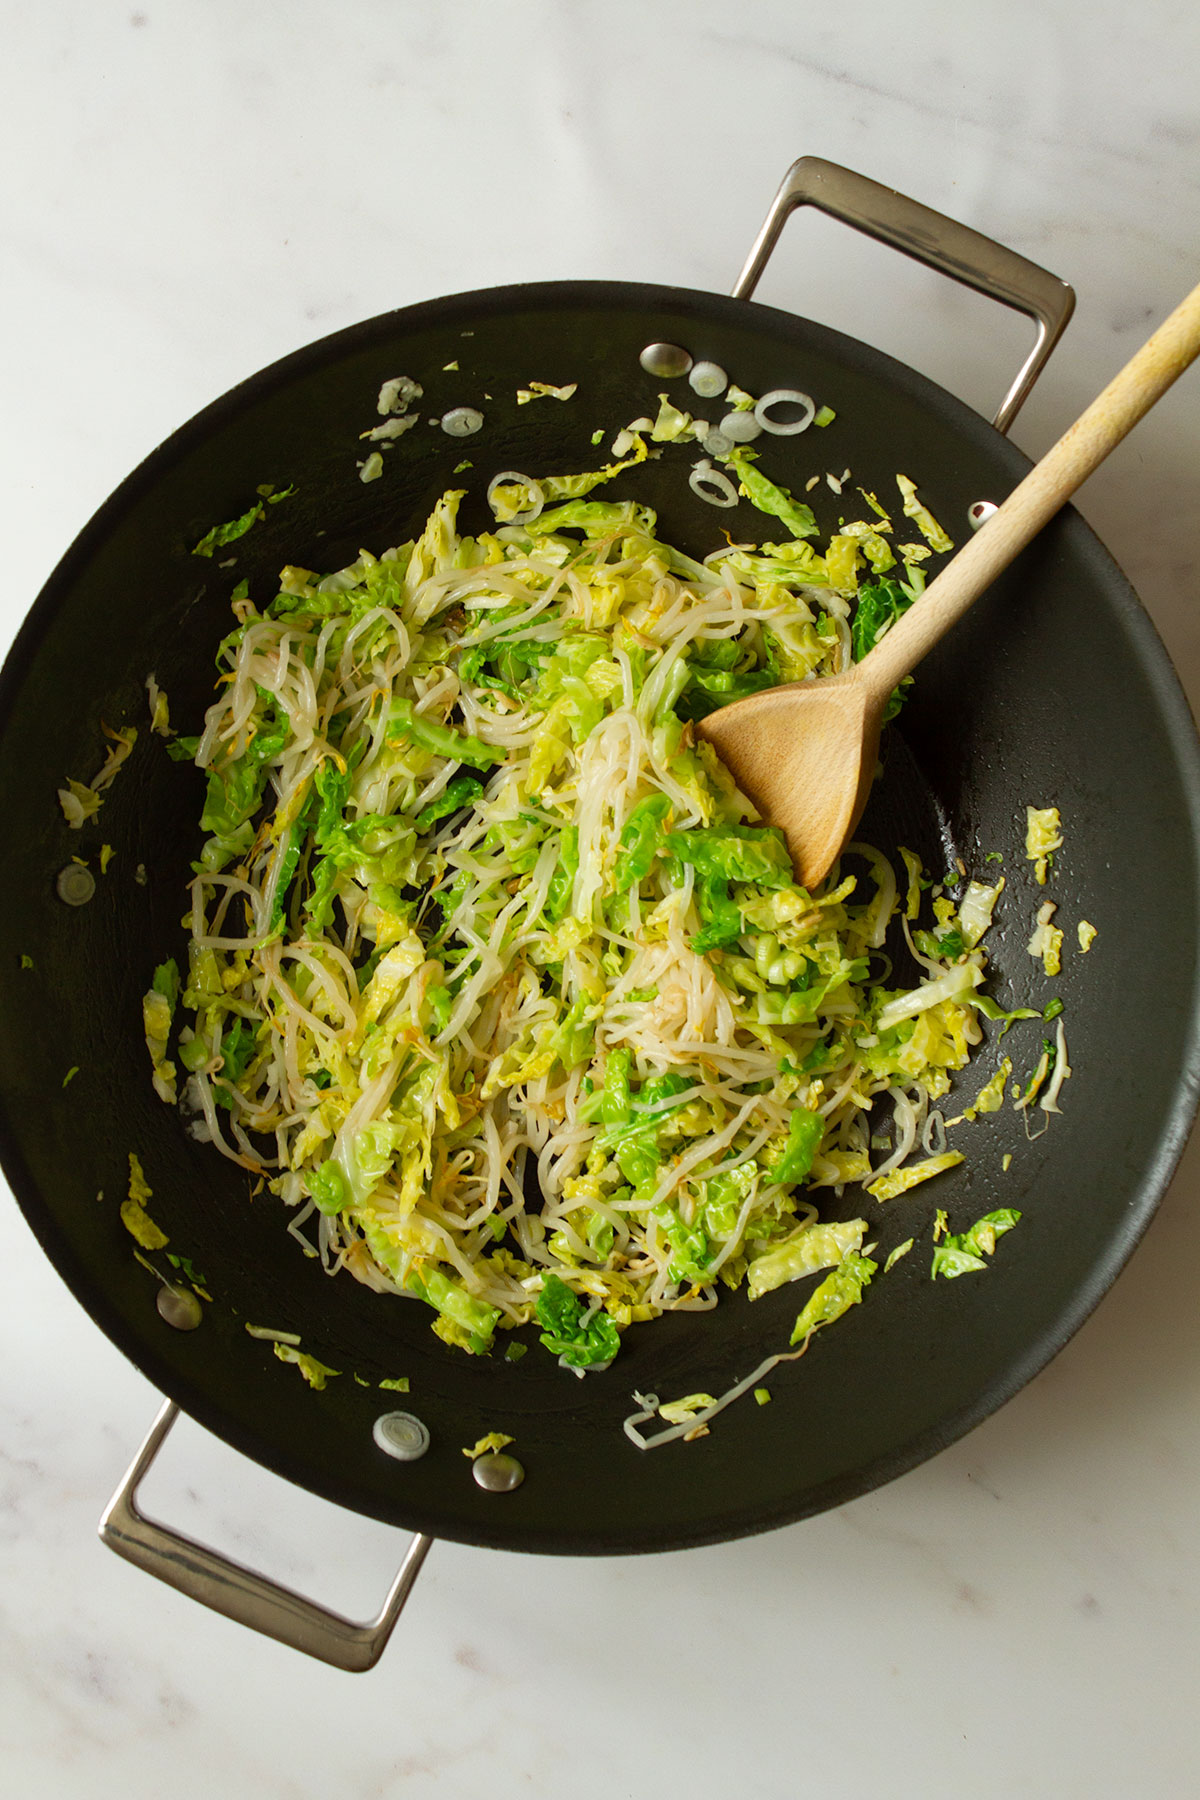 Stirring the fried cabbage, scallions, bean sprouts and garlic in a dark coloured wok using a wooden spoon.